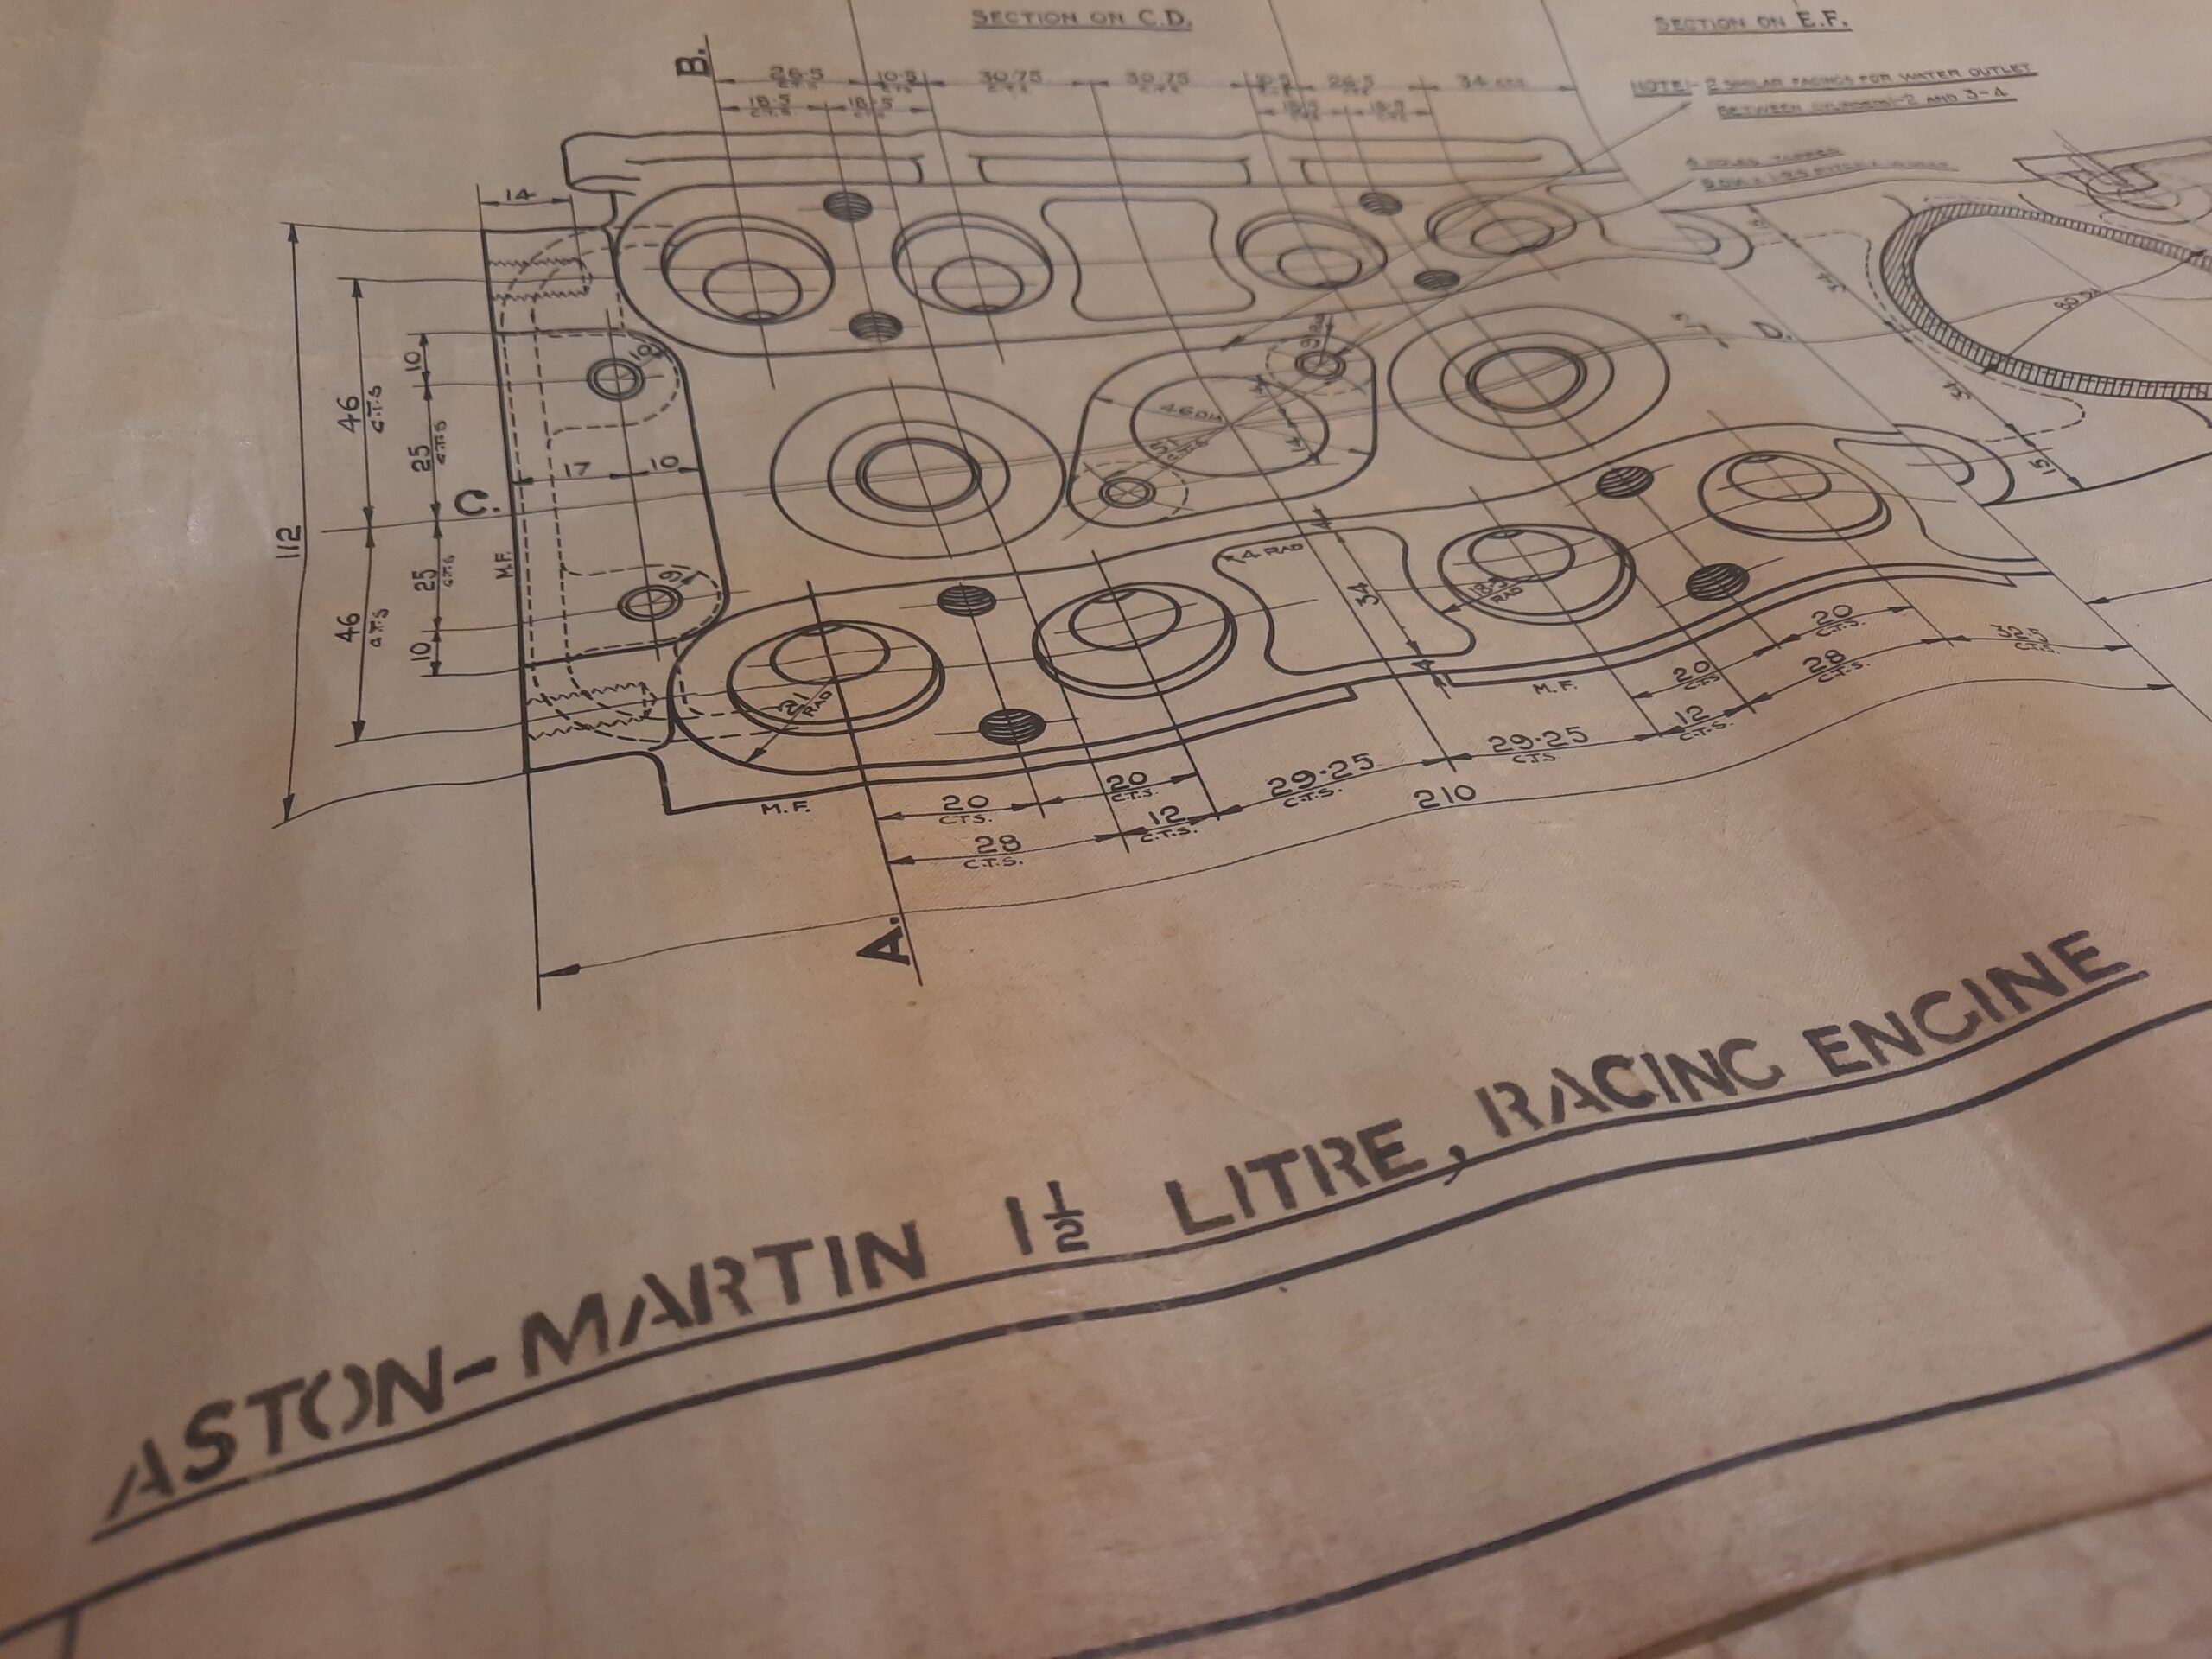 Zoomed in image of an engineering drawing showing 'Aston-Martin 1 1/2 litre, racing engine'